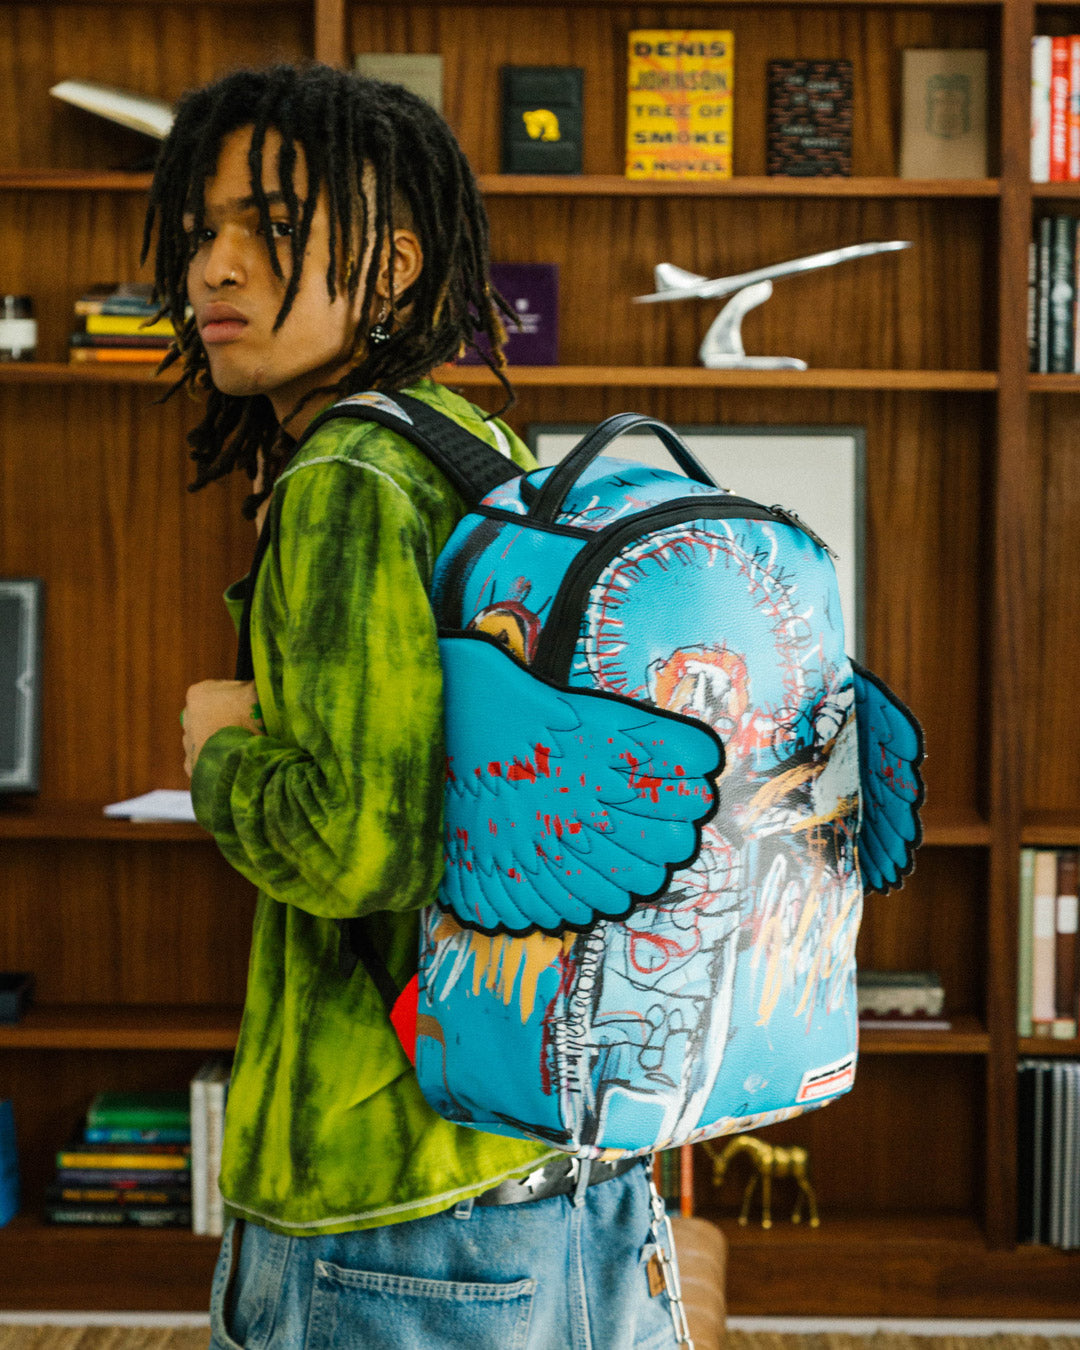 SPRAYGROUND® BACKPACK OFFICIAL BASQUIAT UNTITLED (FALLEN ANGEL) 1981 WING BACKPACK (DLXV)